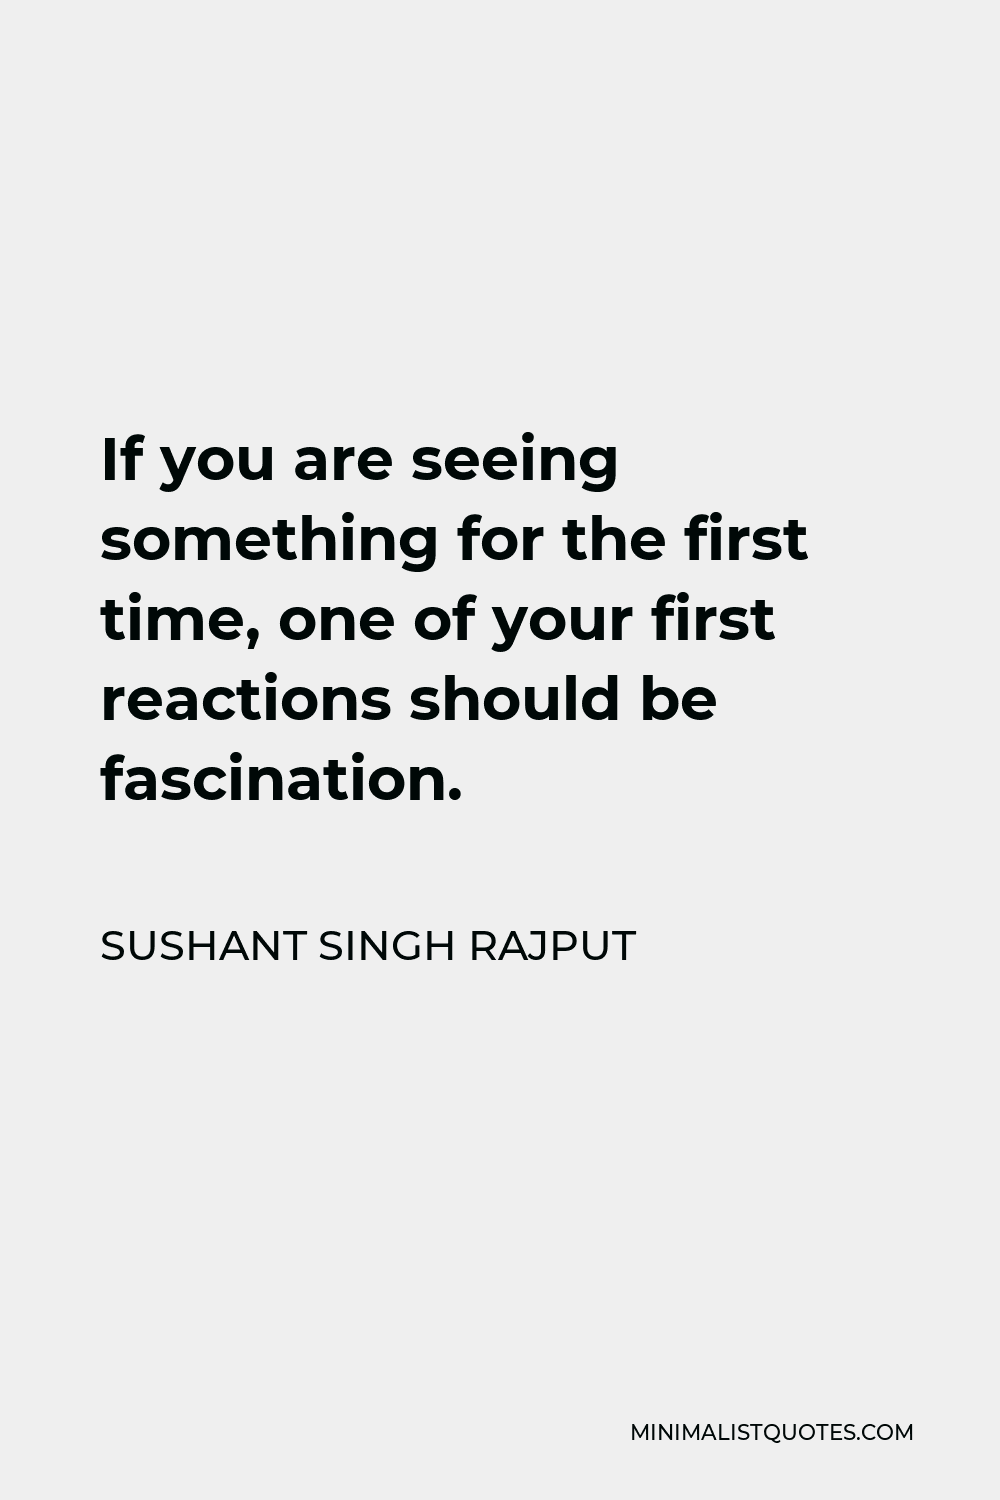 Sushant Singh Rajput Quote - If you are seeing something for the first time, one of your first reactions should be fascination.